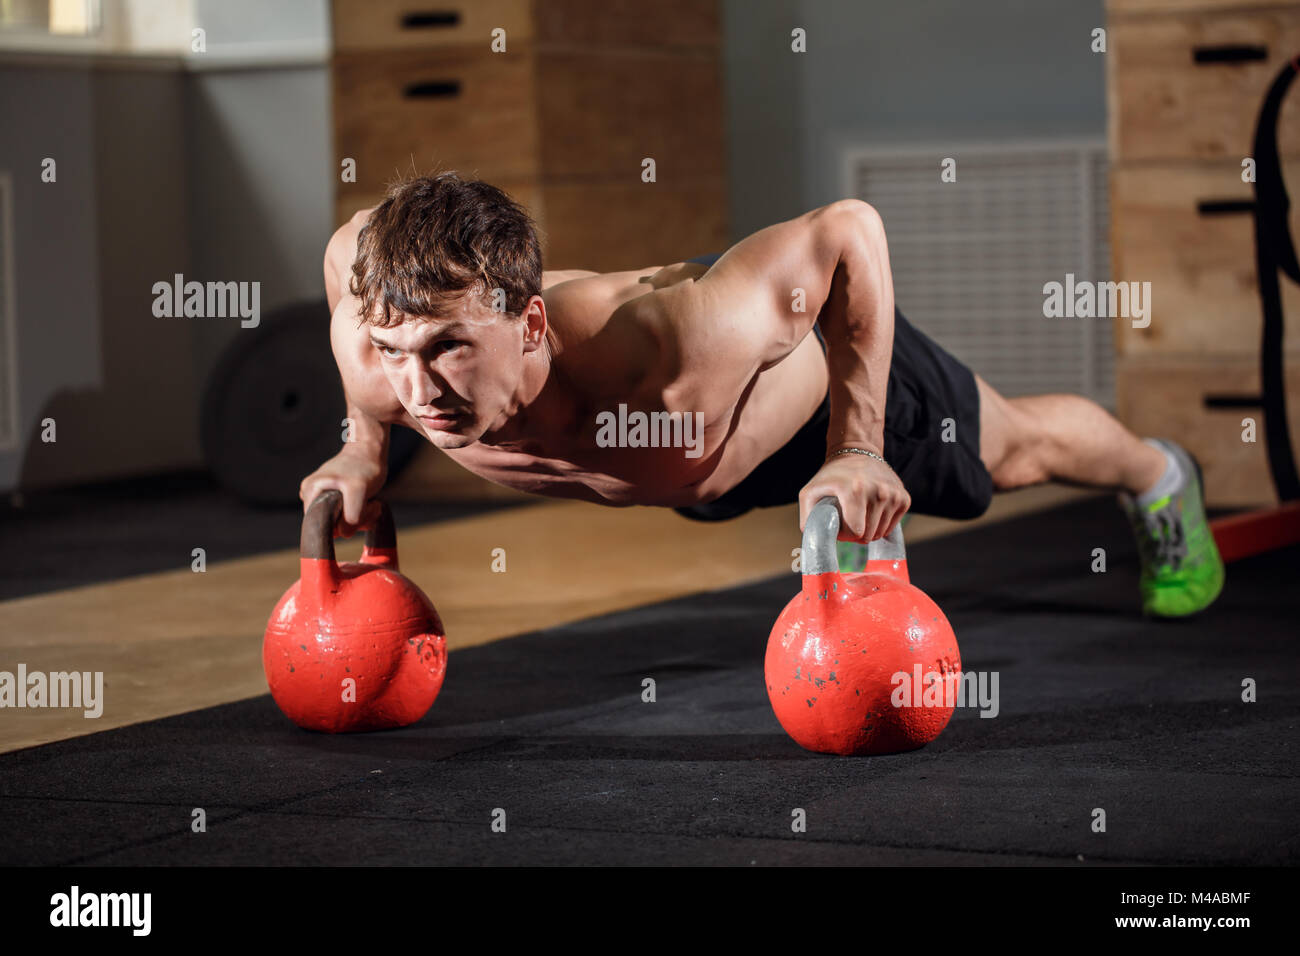 Gym man push-up strength pushup exercise with Kettlebell in a workout Stock Photo